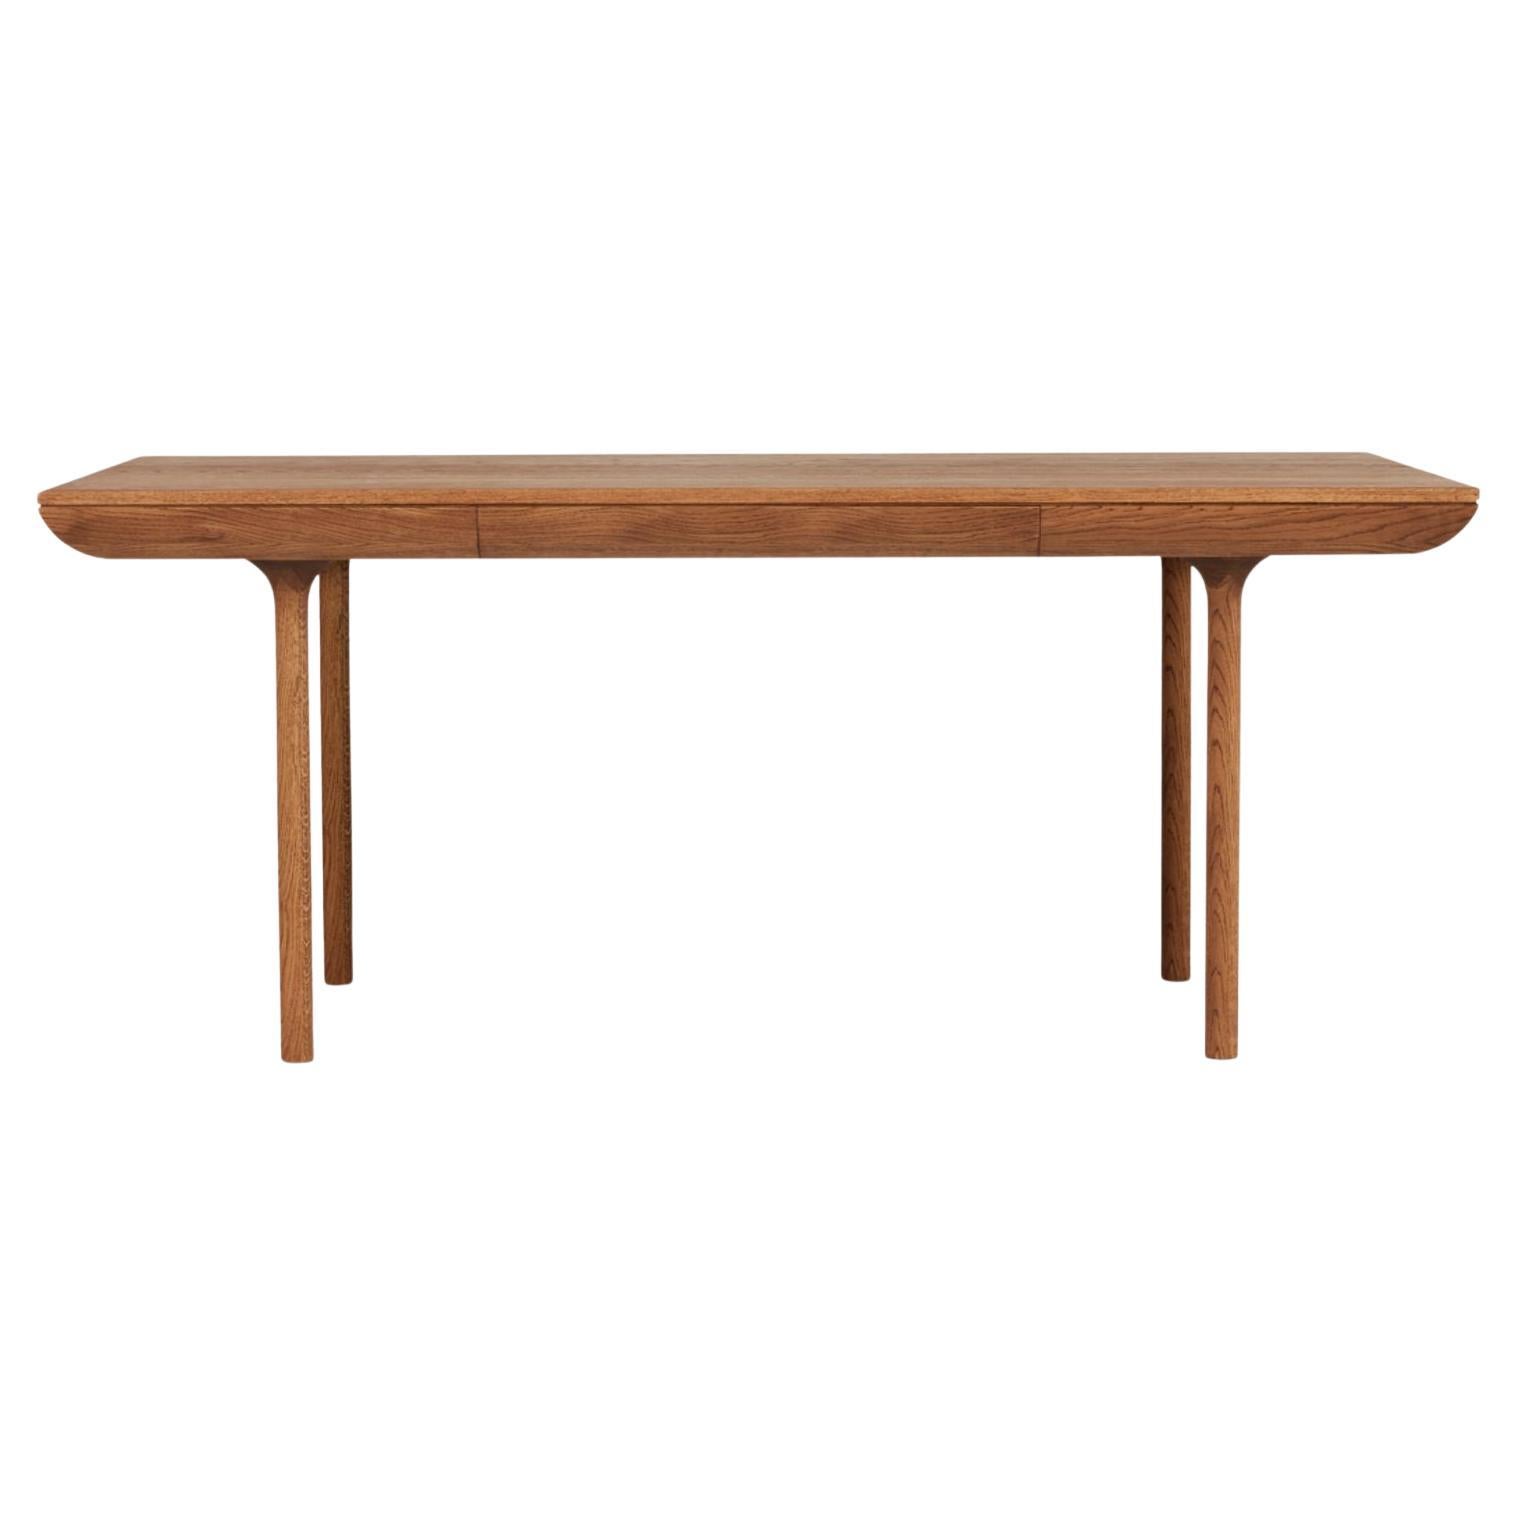 Rúna Teak Oiled Oak Dining Table by Warm Nordic